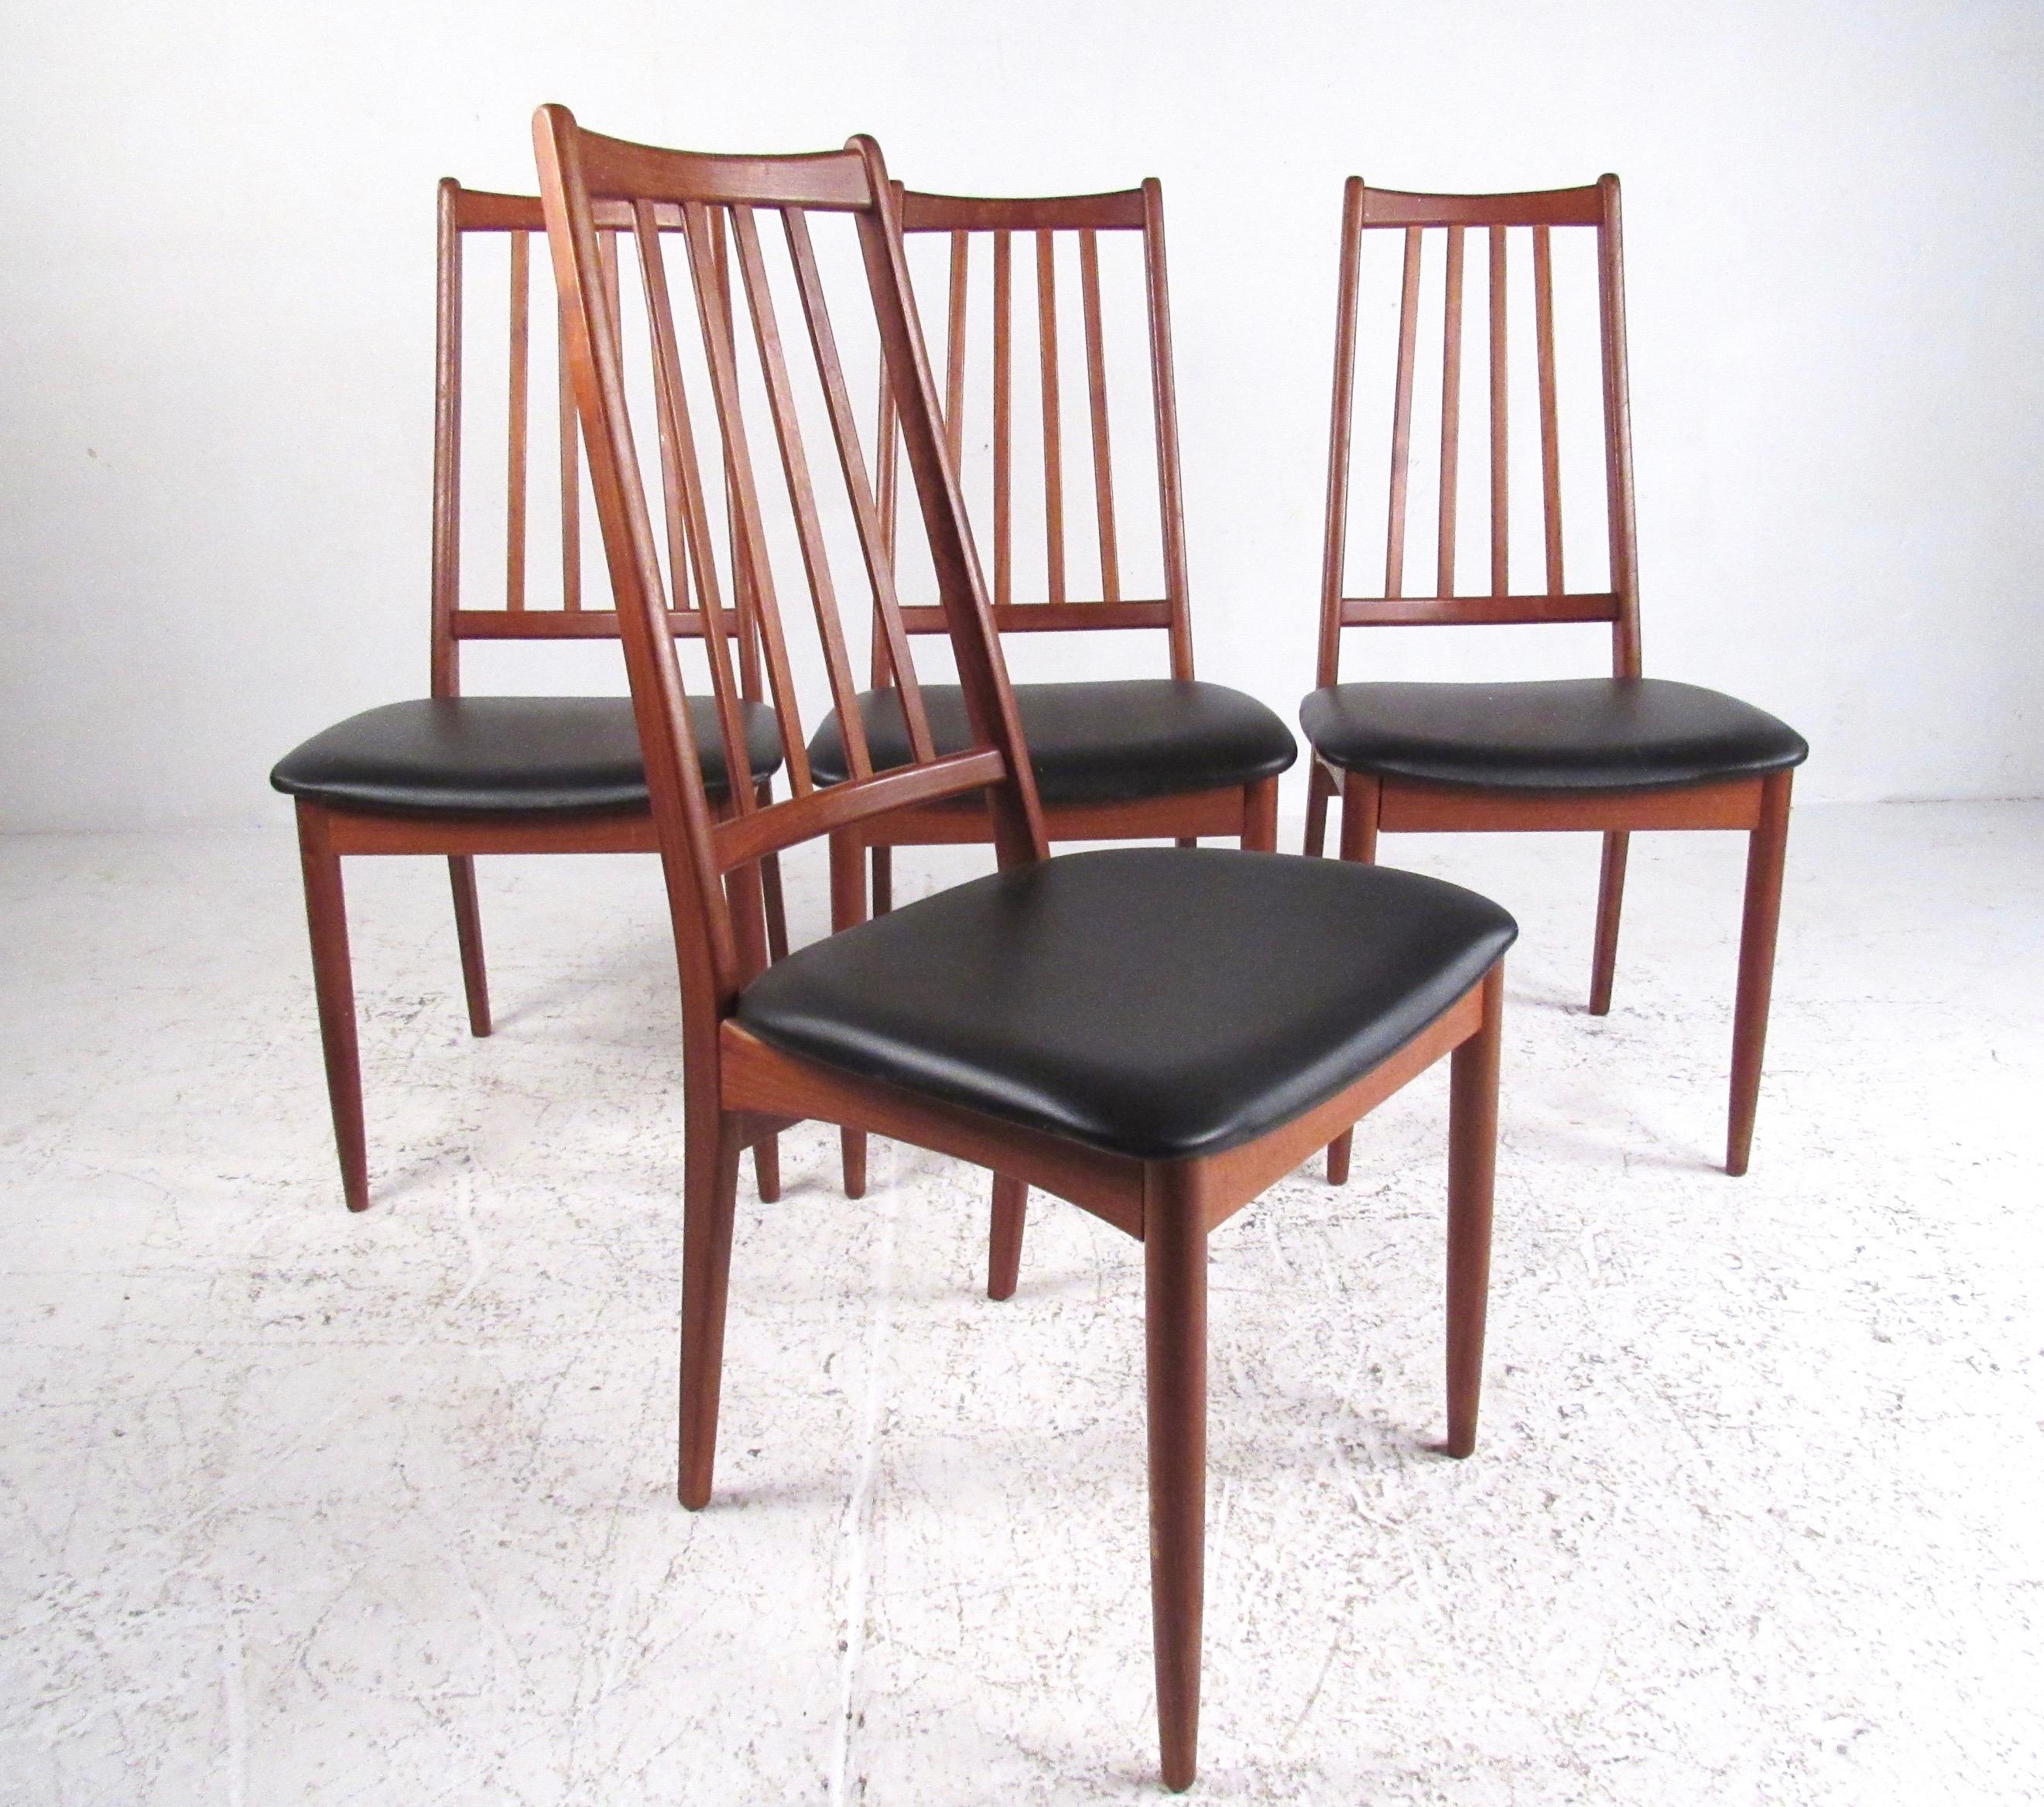 This stylish set of four Mid-Century Modern dining chairs features shapely spoked seat backs and with padded vinyl seats. Comfortable Scandinavian Modern design makes a striking addition to kitchen or dining room interiors. Please confirm item